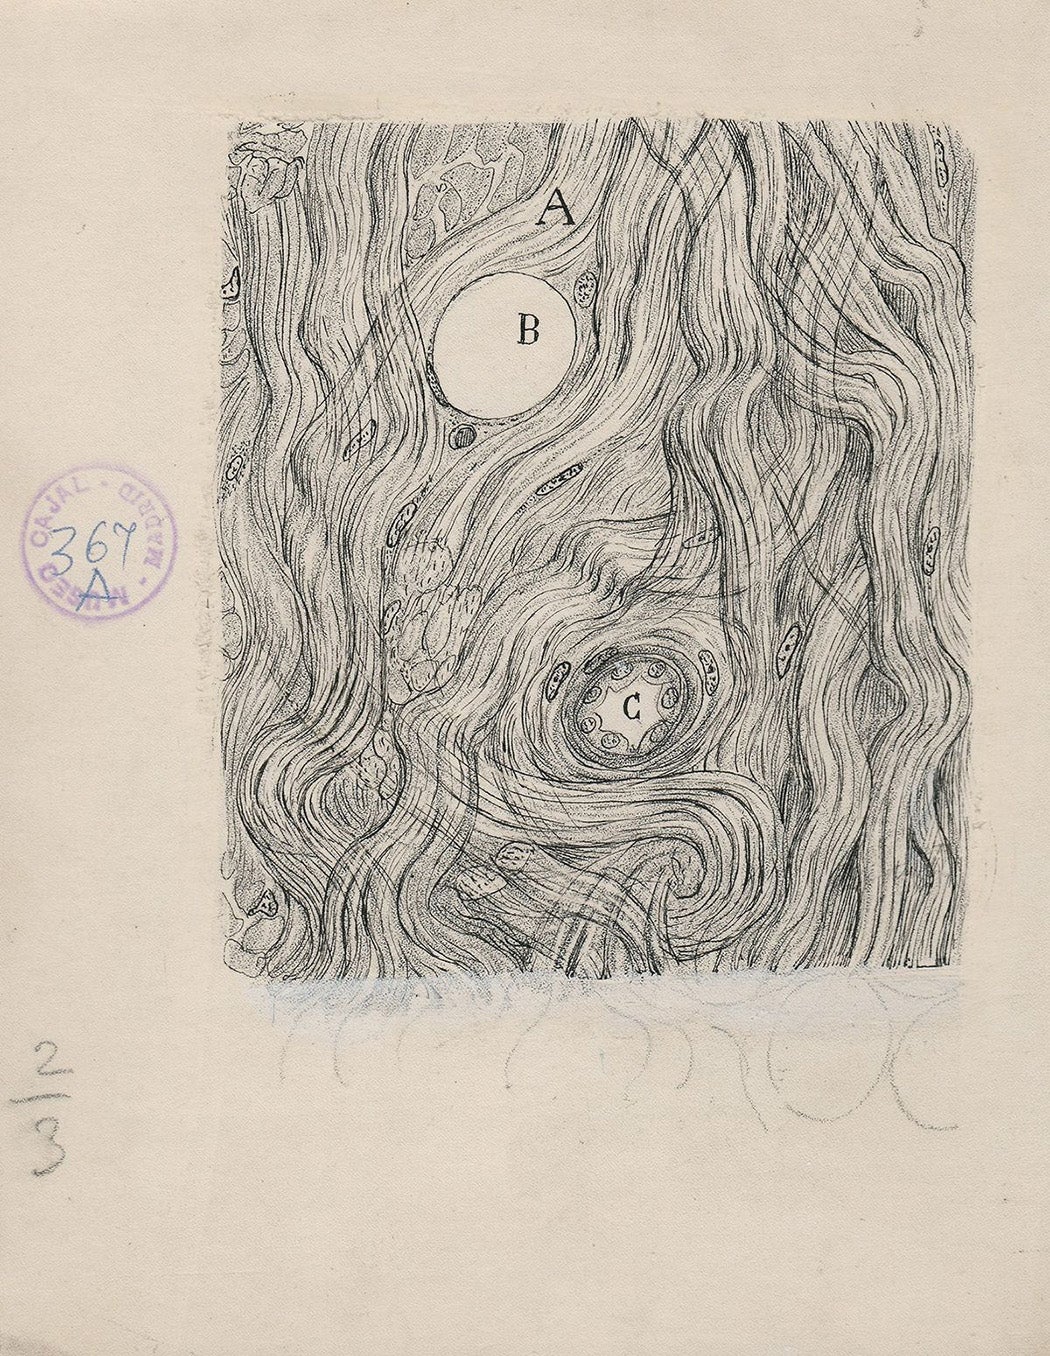 Illustration by Cajal of tumor cells of the covering membranes of the brain